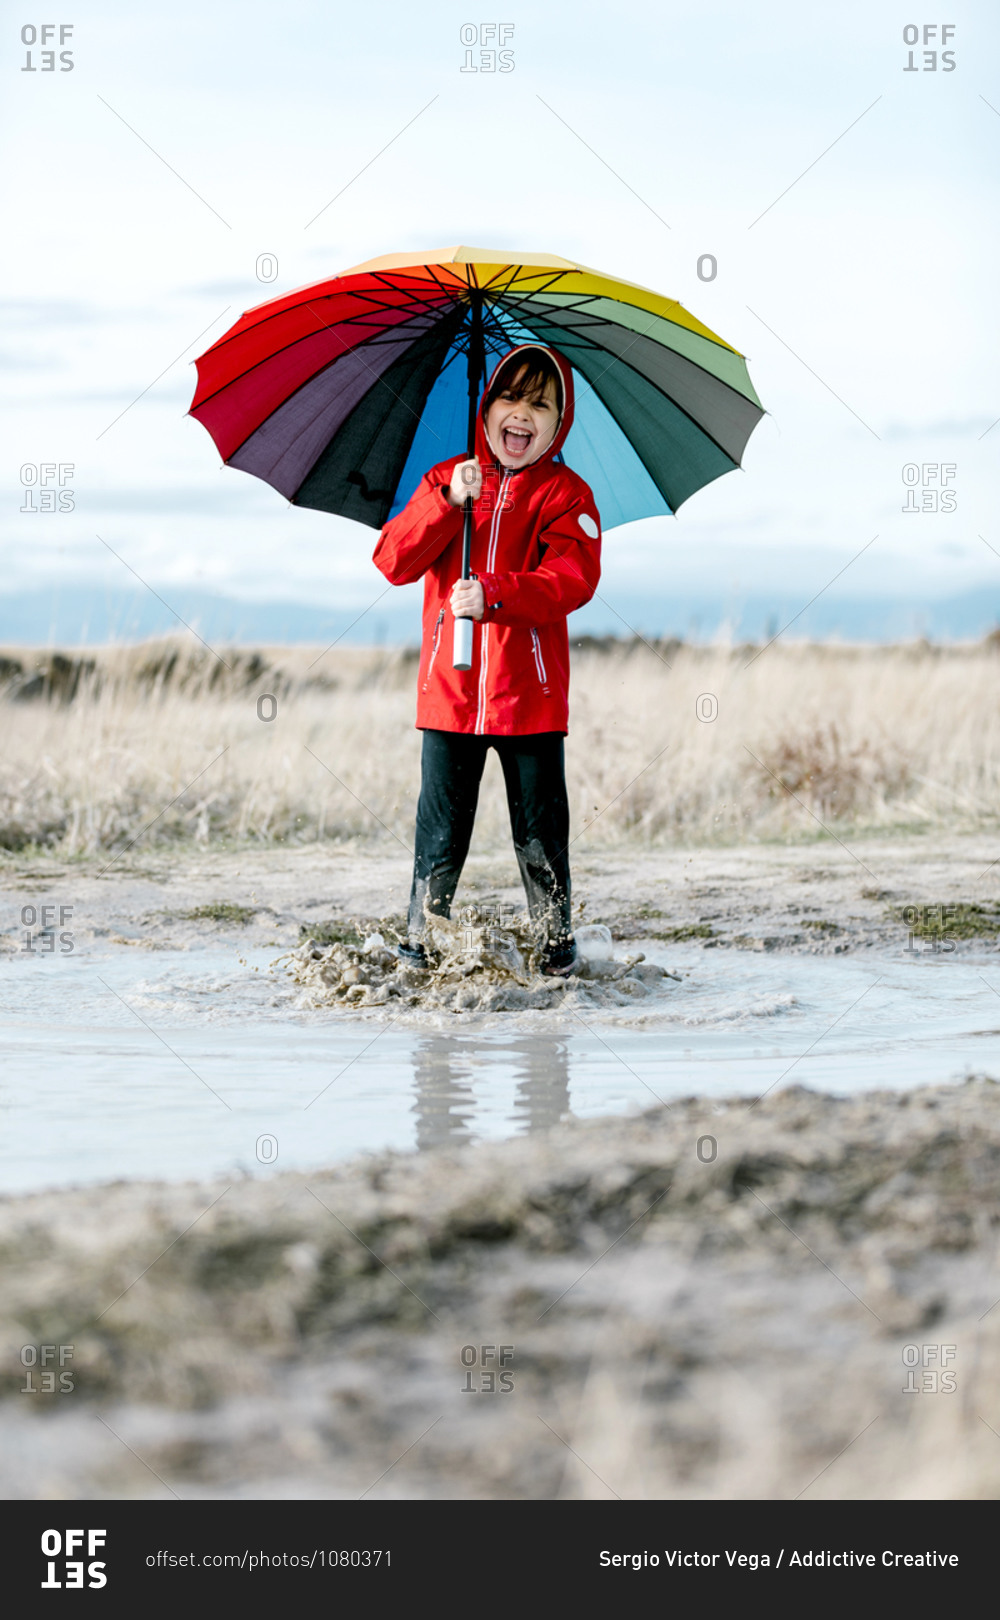 Excited little girl with colorful umbrella and in rubber boots playing in puddle while splashing water and having fun